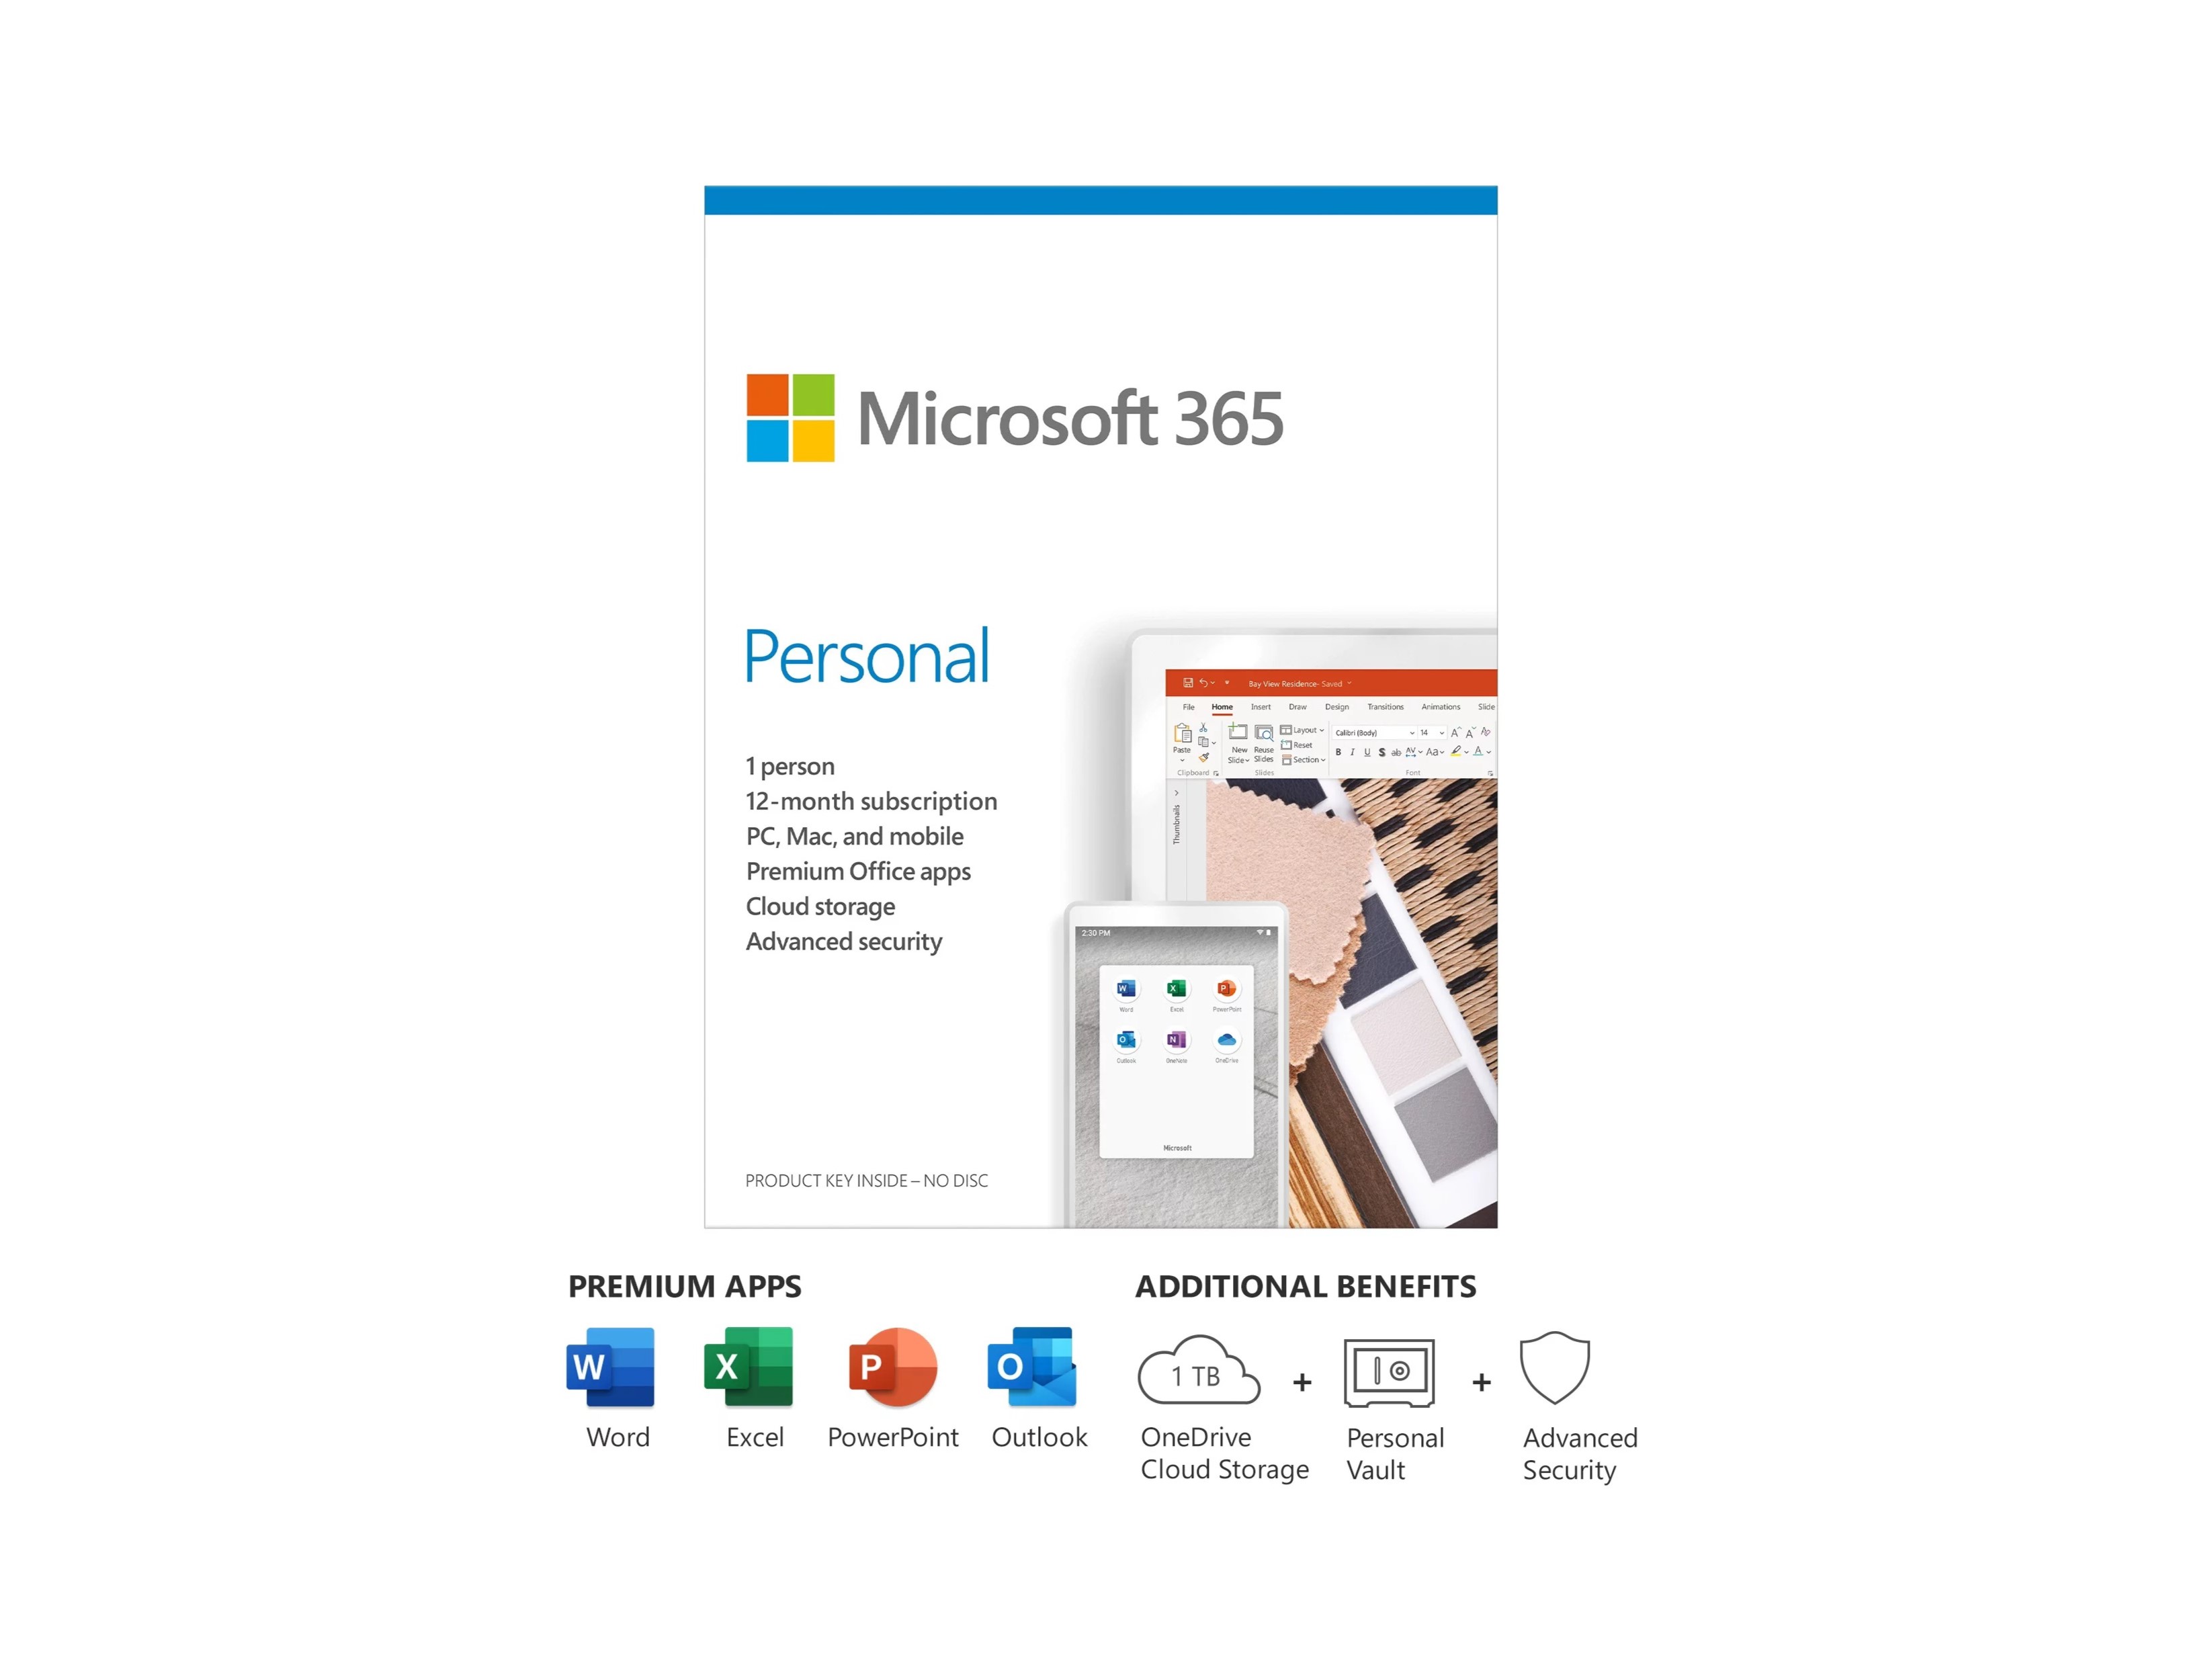 Microsoft 365 Personal 1 year product image with breakdown of inclusions.